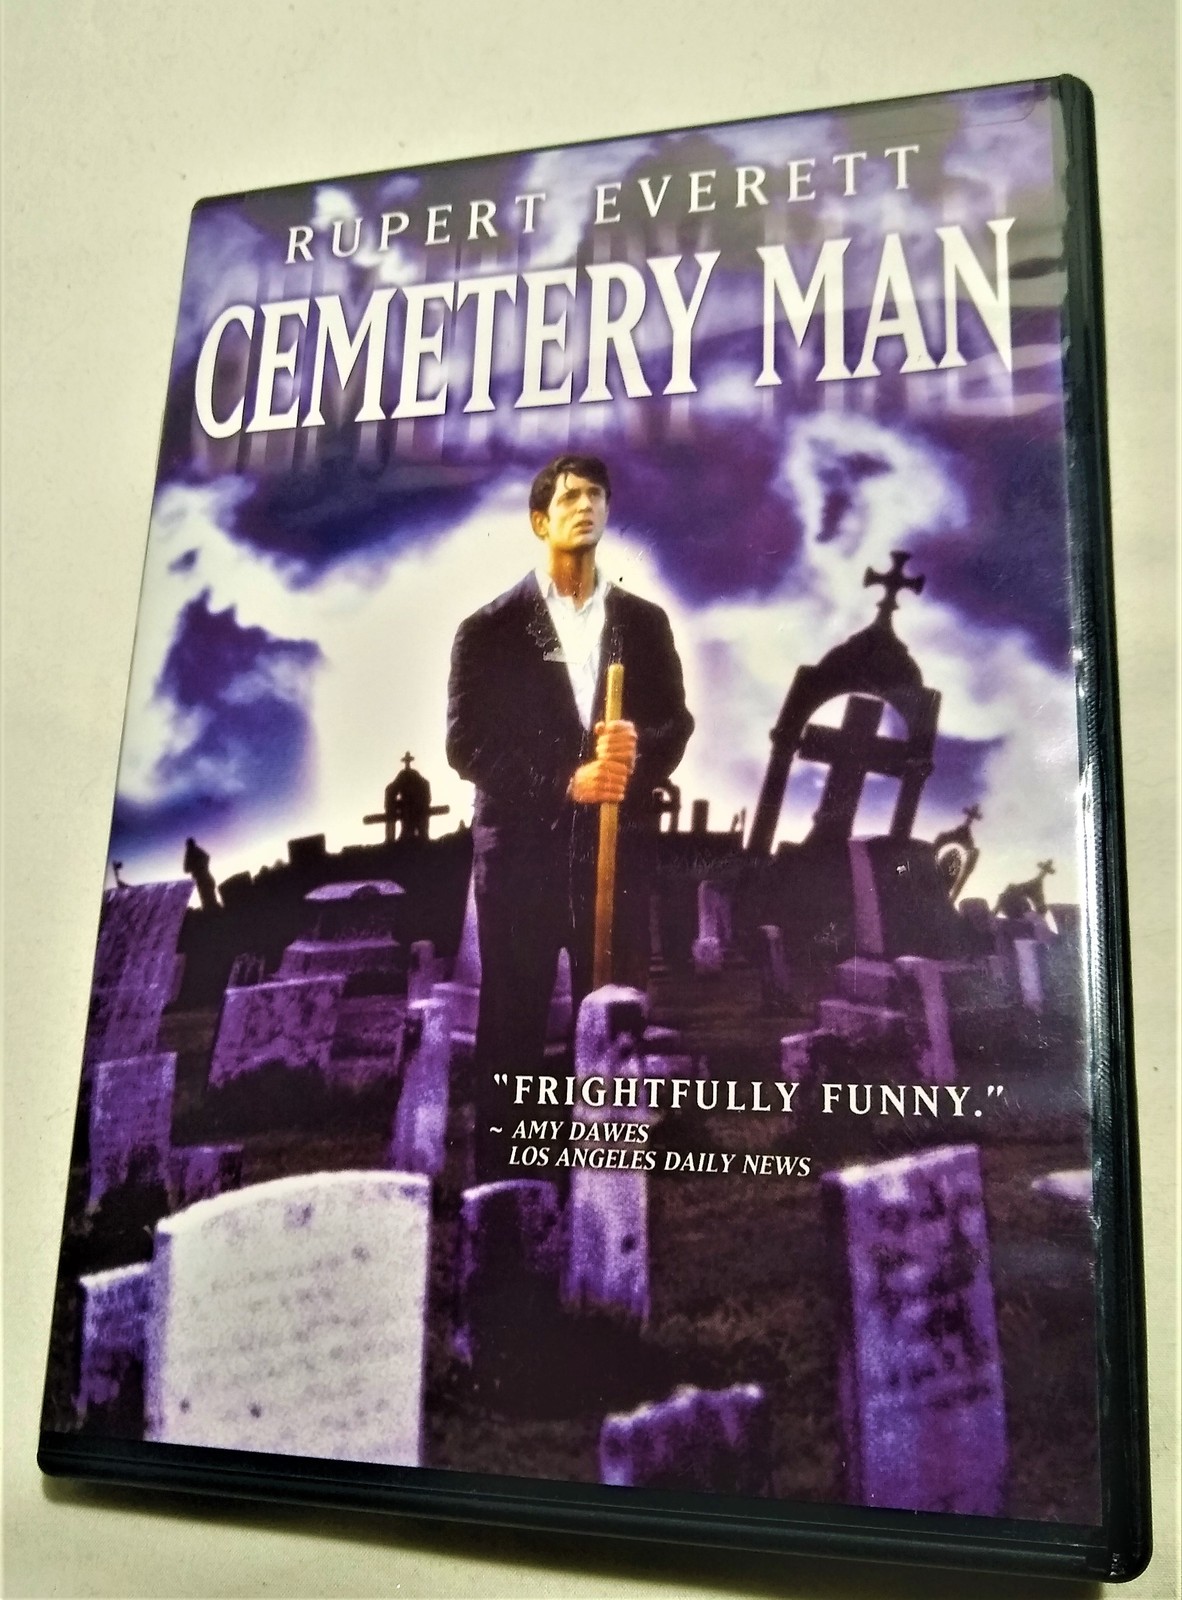 Cemetery Man DVD Pre-owned & tested - DVDs & Blu-ray Discs